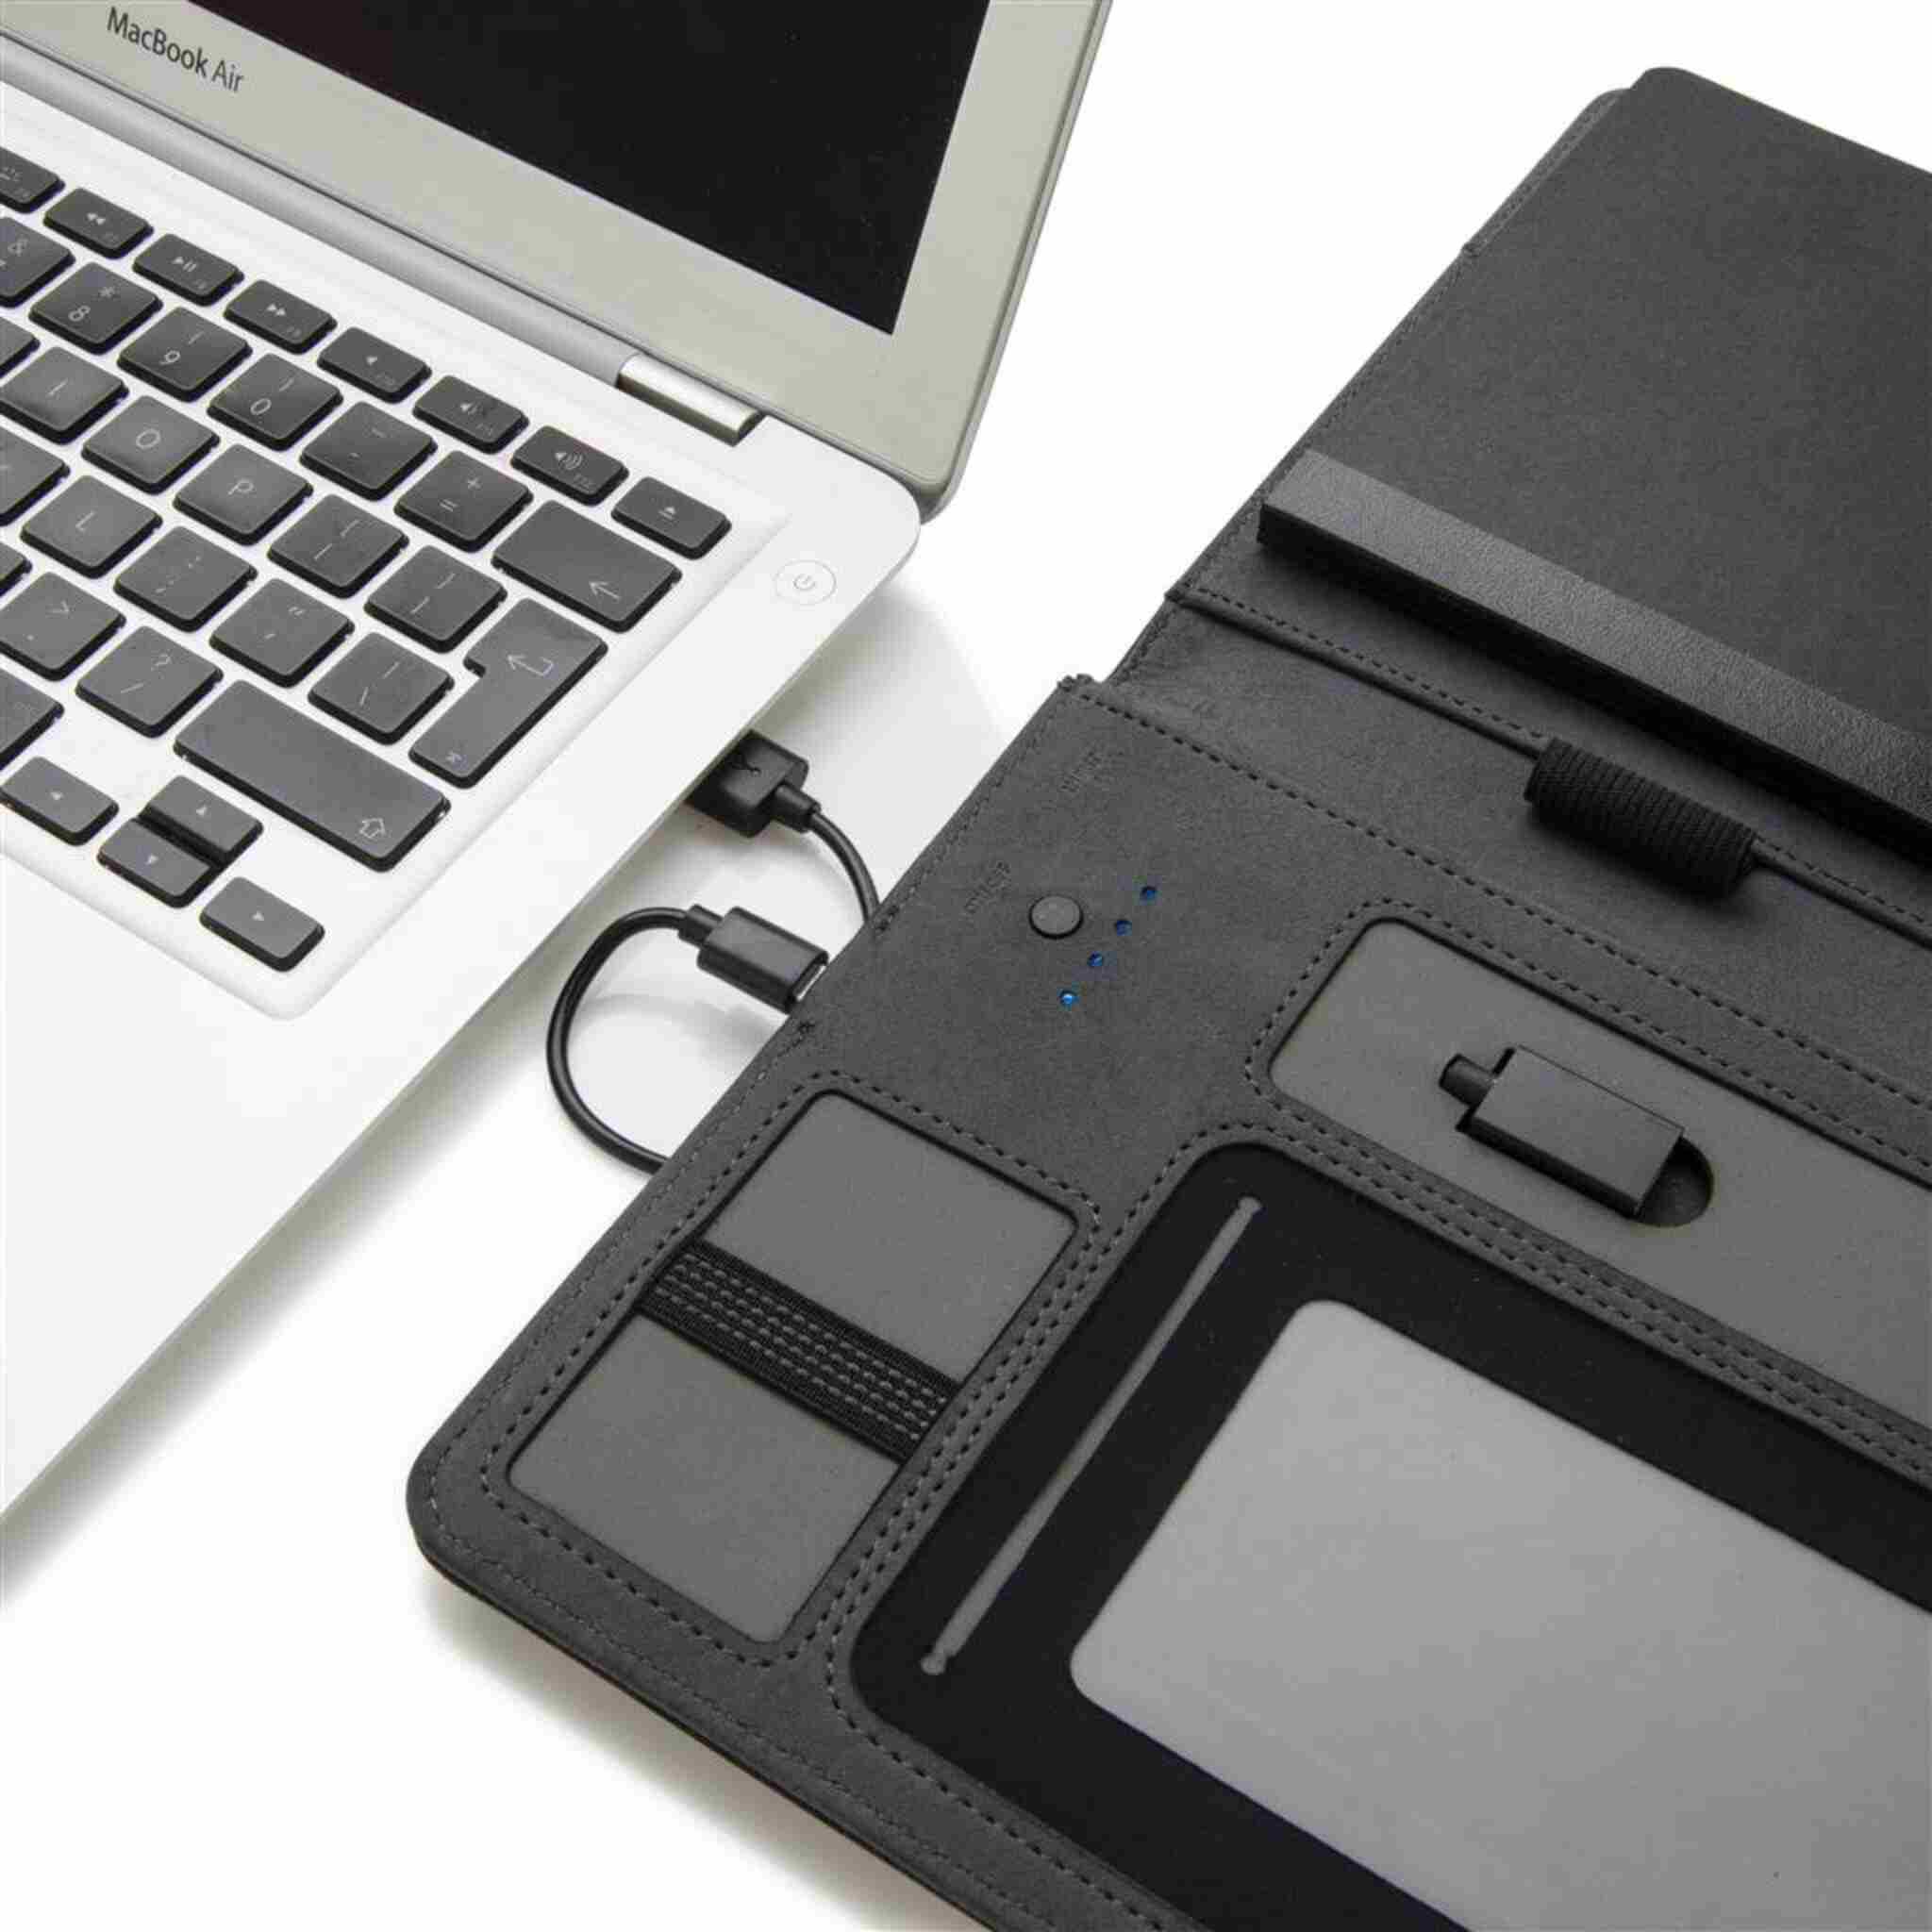 Notebook Portfolio with 3000mAh Powerbank in use with a laptop computer